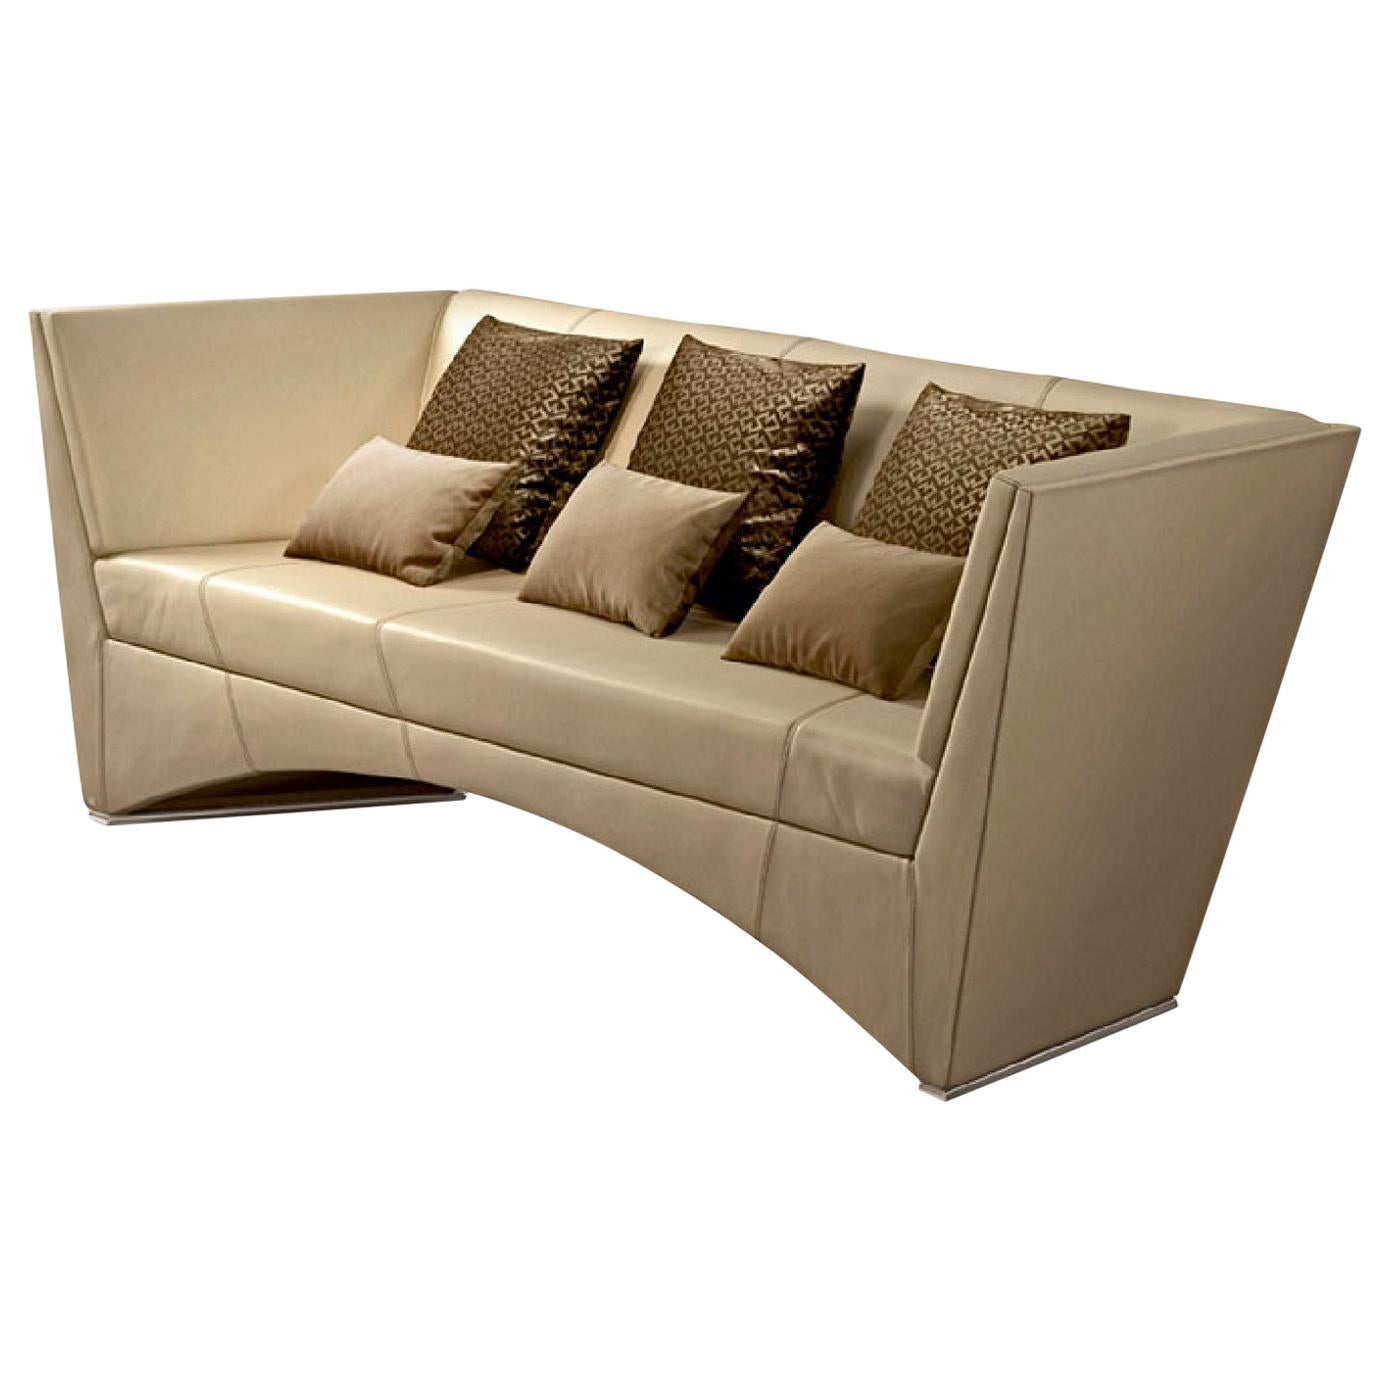 Fantastic Sofa Frame Made Solid Timber and  Wood Stainless Steel Feet